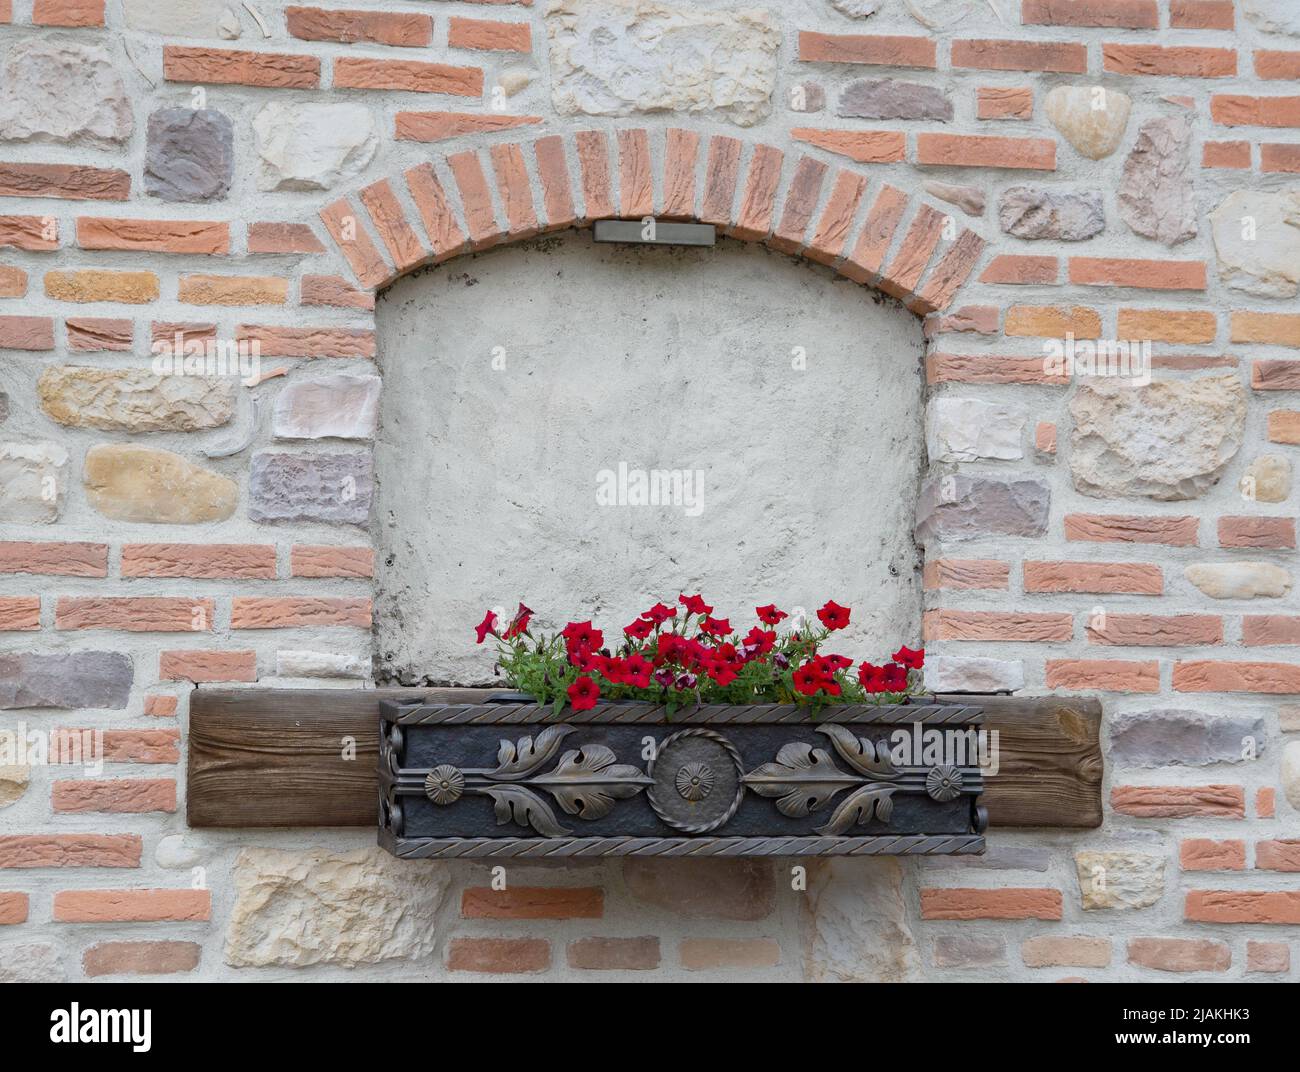 Laid down antique semicircular window in a brick wall with a flowerpot Stock Photo